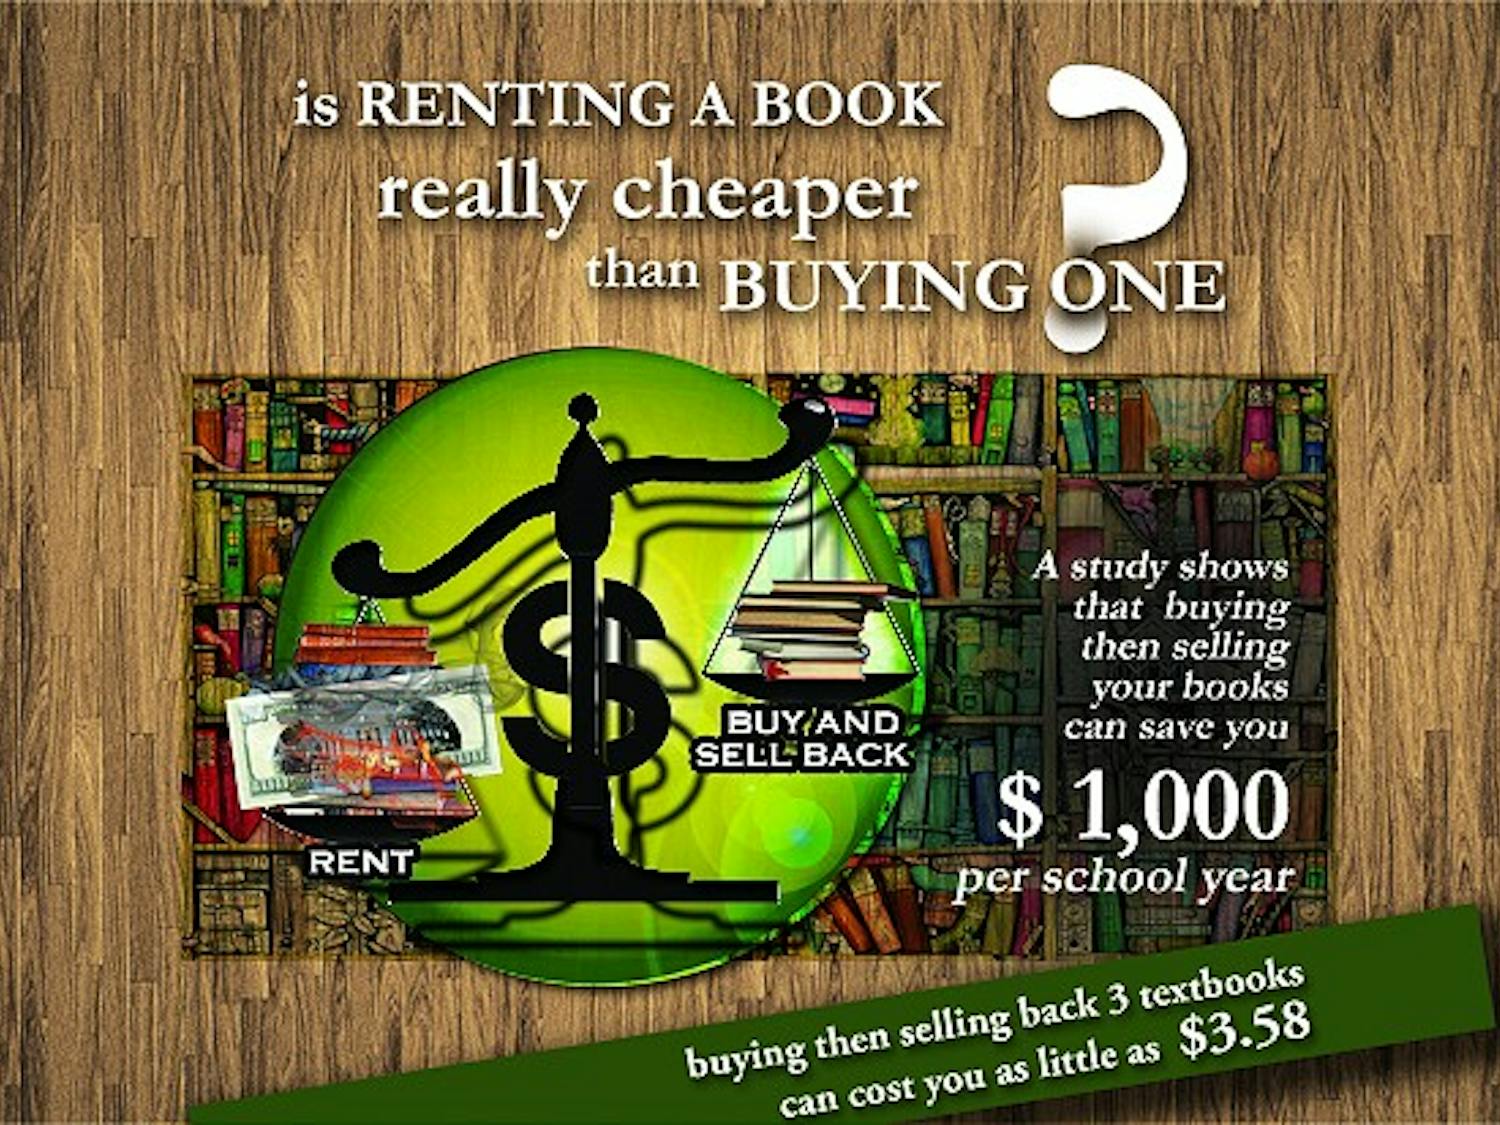 A recent study found that it is cheaper to buy textbooks then sell them back, rather than renting them. A student can save approximately $1,000 per school year, according to the study.